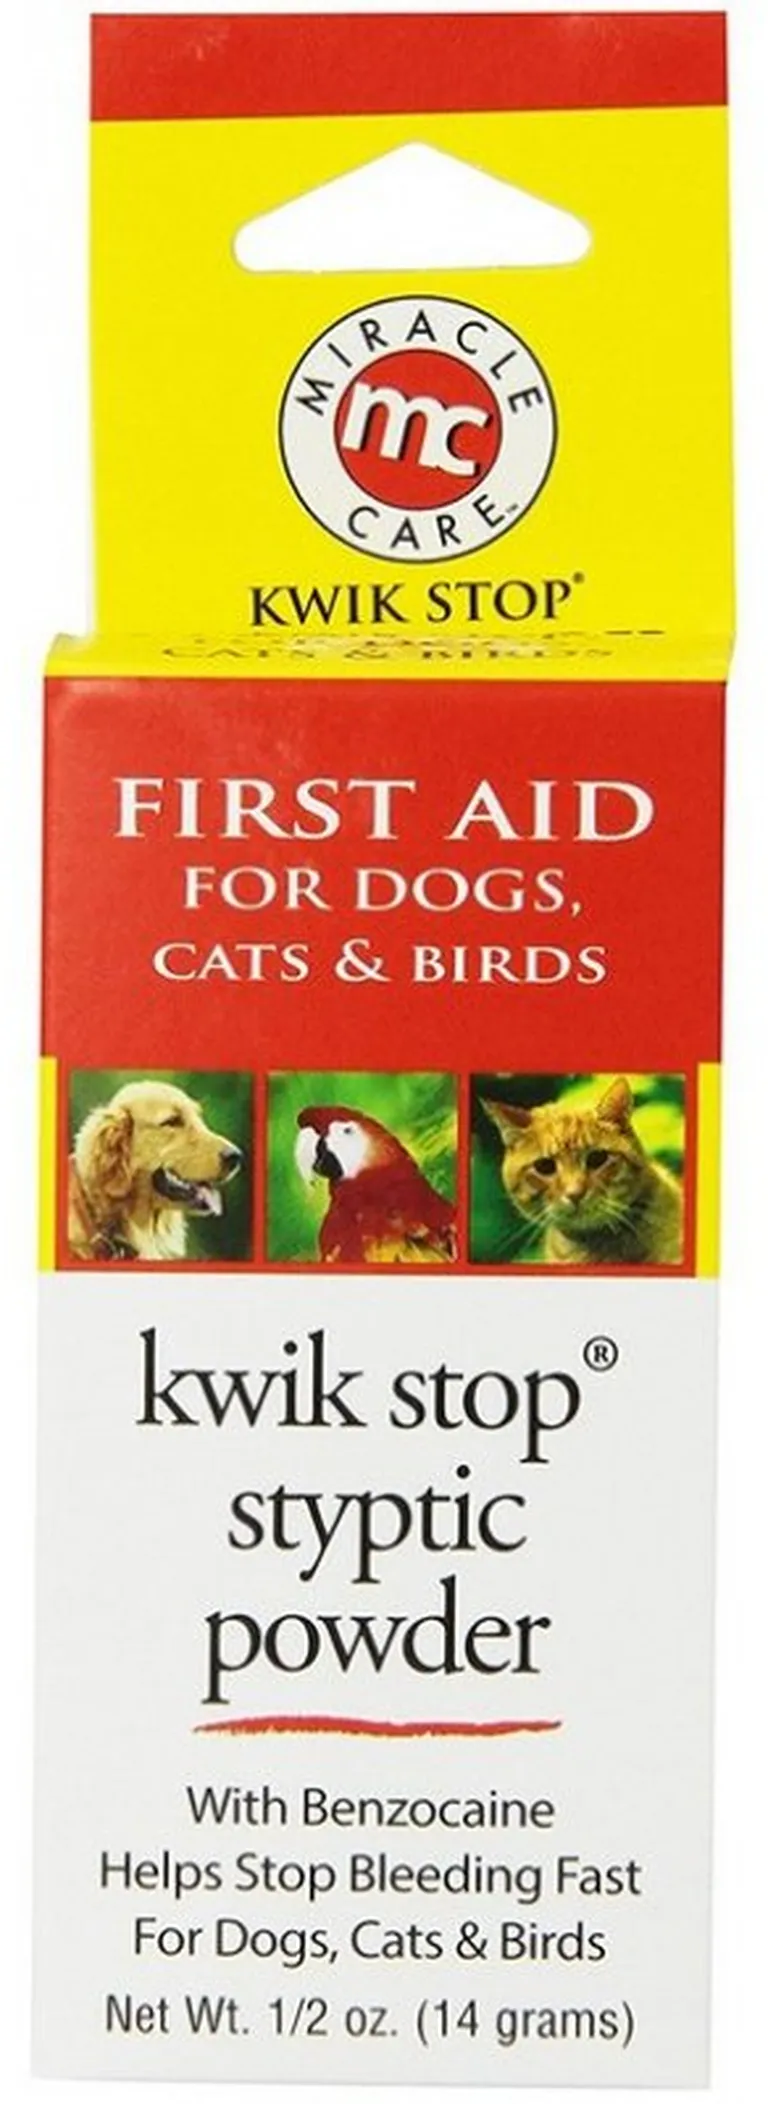 Miracle Care Kwik Stop Styptic Powder for Dogs, Cats and Birds Photo 2